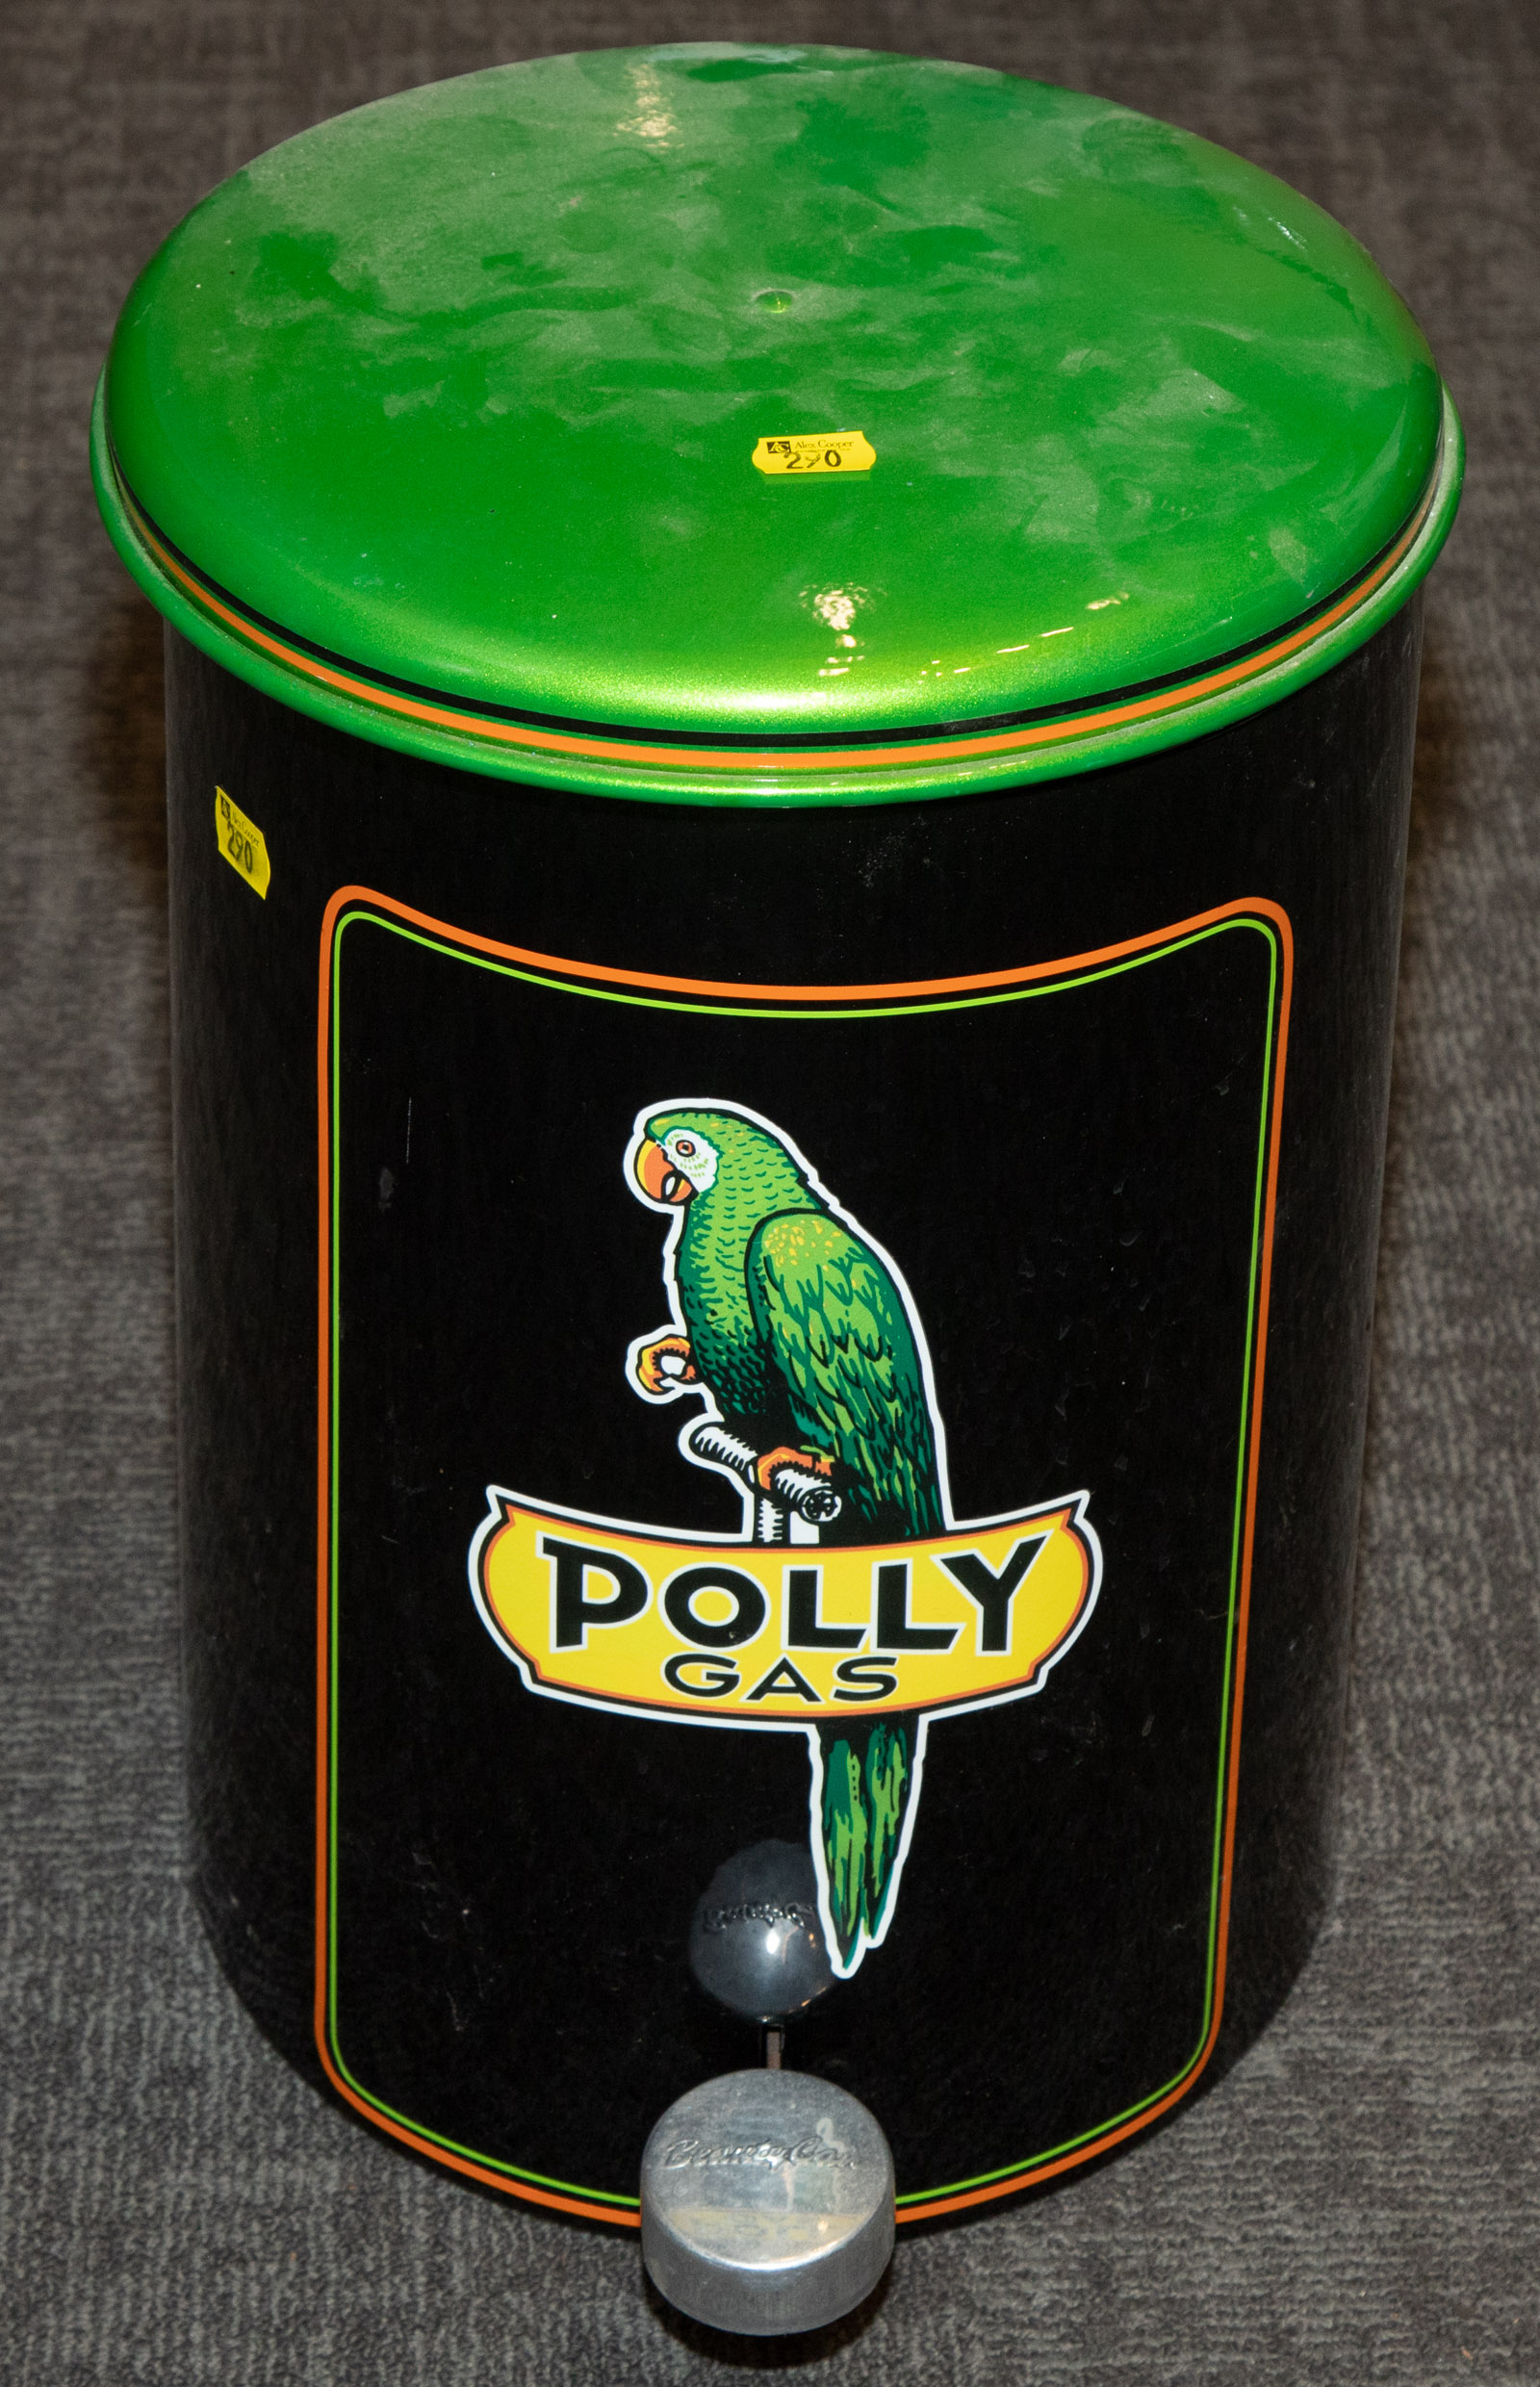 POLLY GAS ENAMELED METAL TRASH CAN With